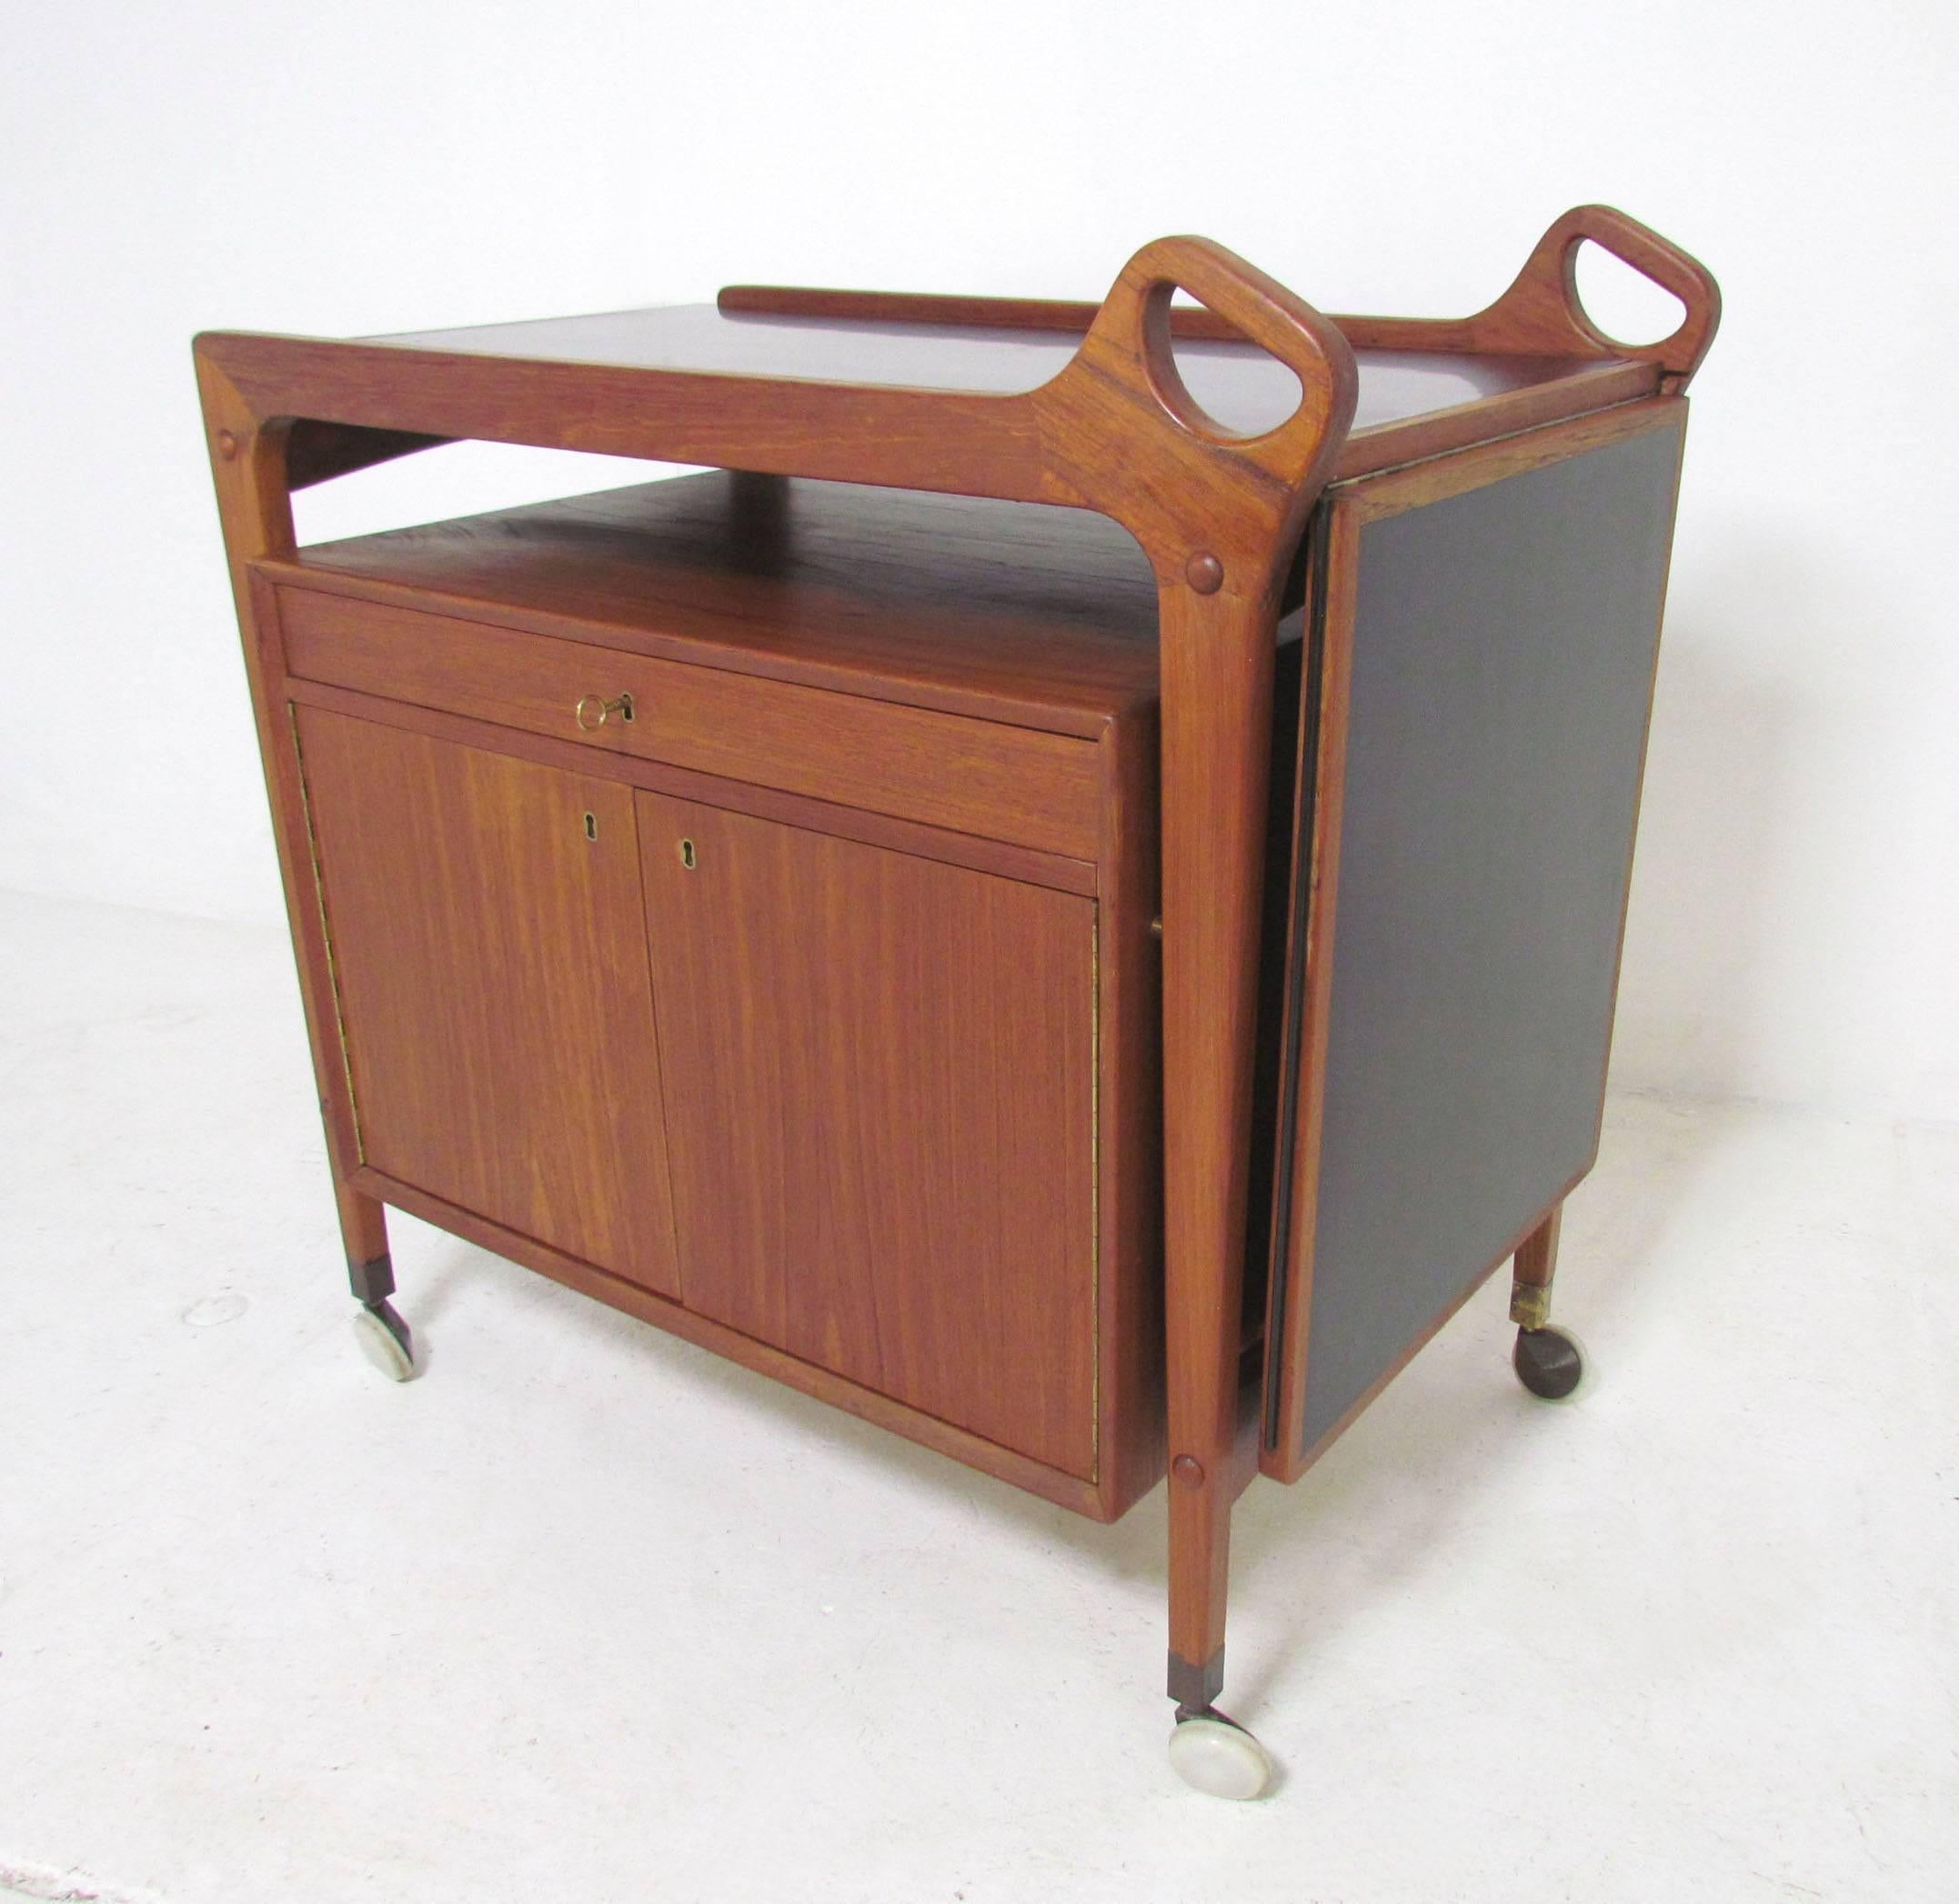 Danish teak drinks serving cart with locking storage cabinet with ample space for liquor bottles and a flatware drawer for serving utensils. Also features a spill resistant laminate top that expands if needed when drinks are being mixed and served.